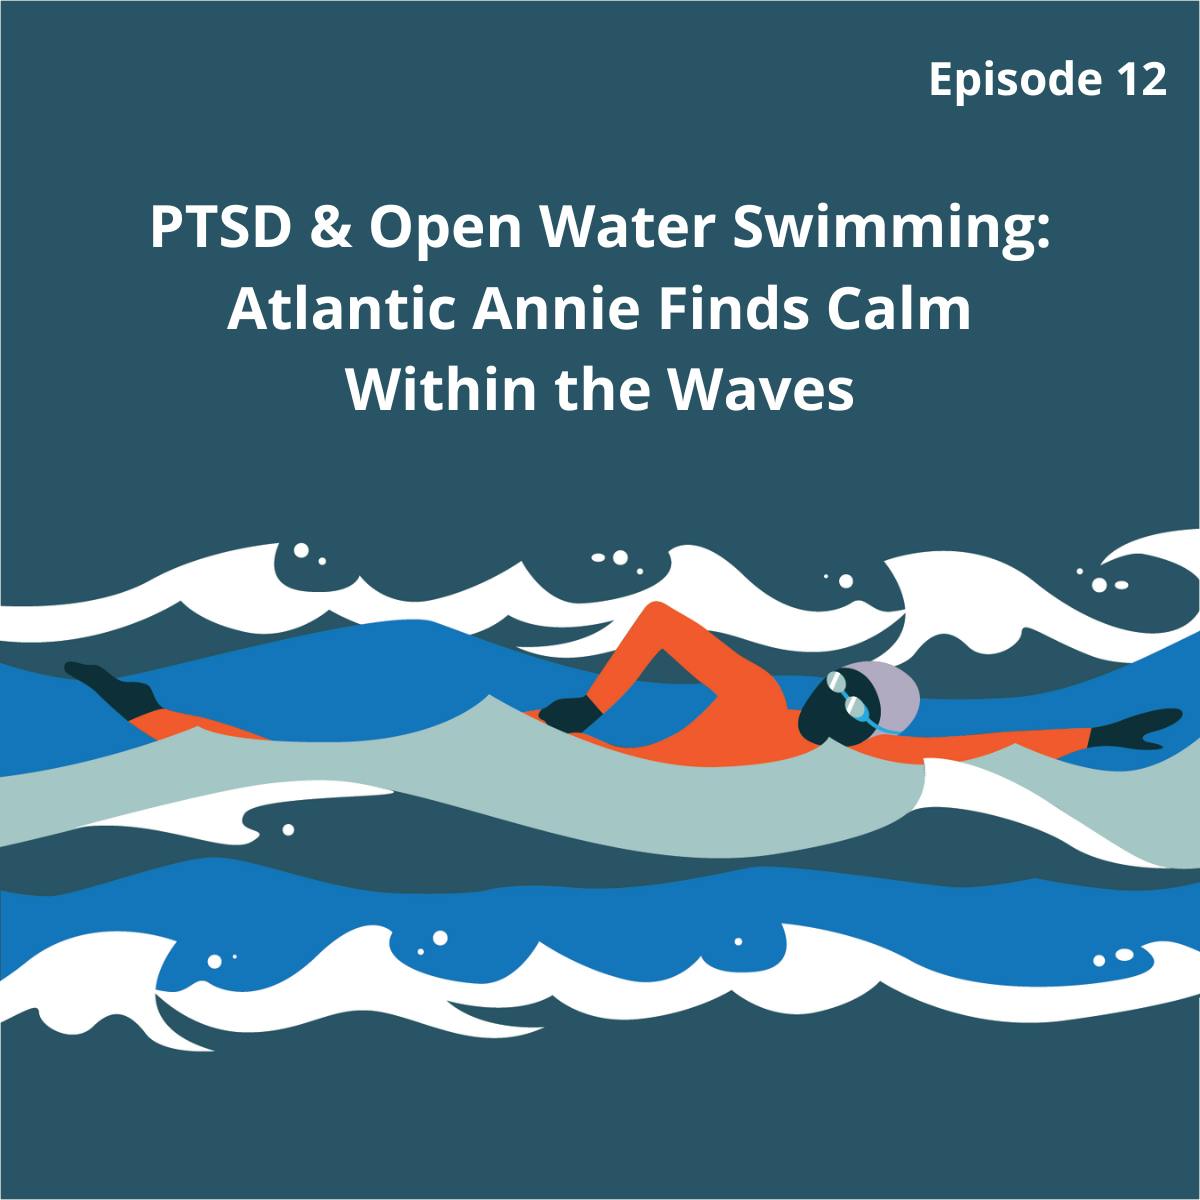 PTSD & Open Water Swimming: Atlantic Annie Finds Calm Within the Waves